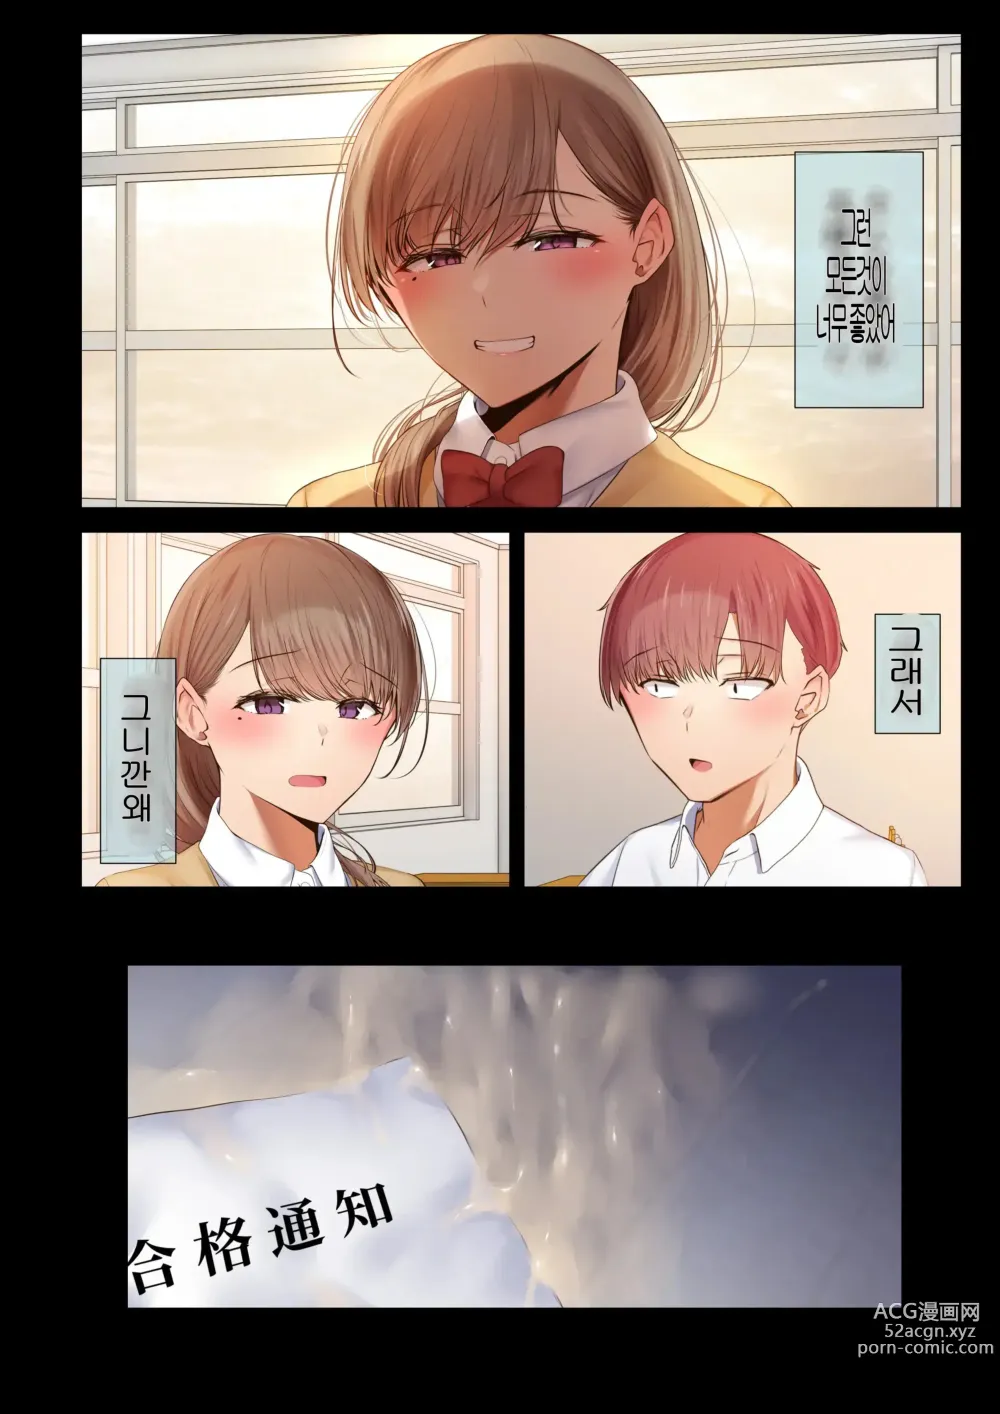 Page 5 of doujinshi A story about my favorite senior, who can be trusted, is made into a female by Yarichin. 의지할수 있는 선배가 야한친구에 의해 암컷이된 이야기